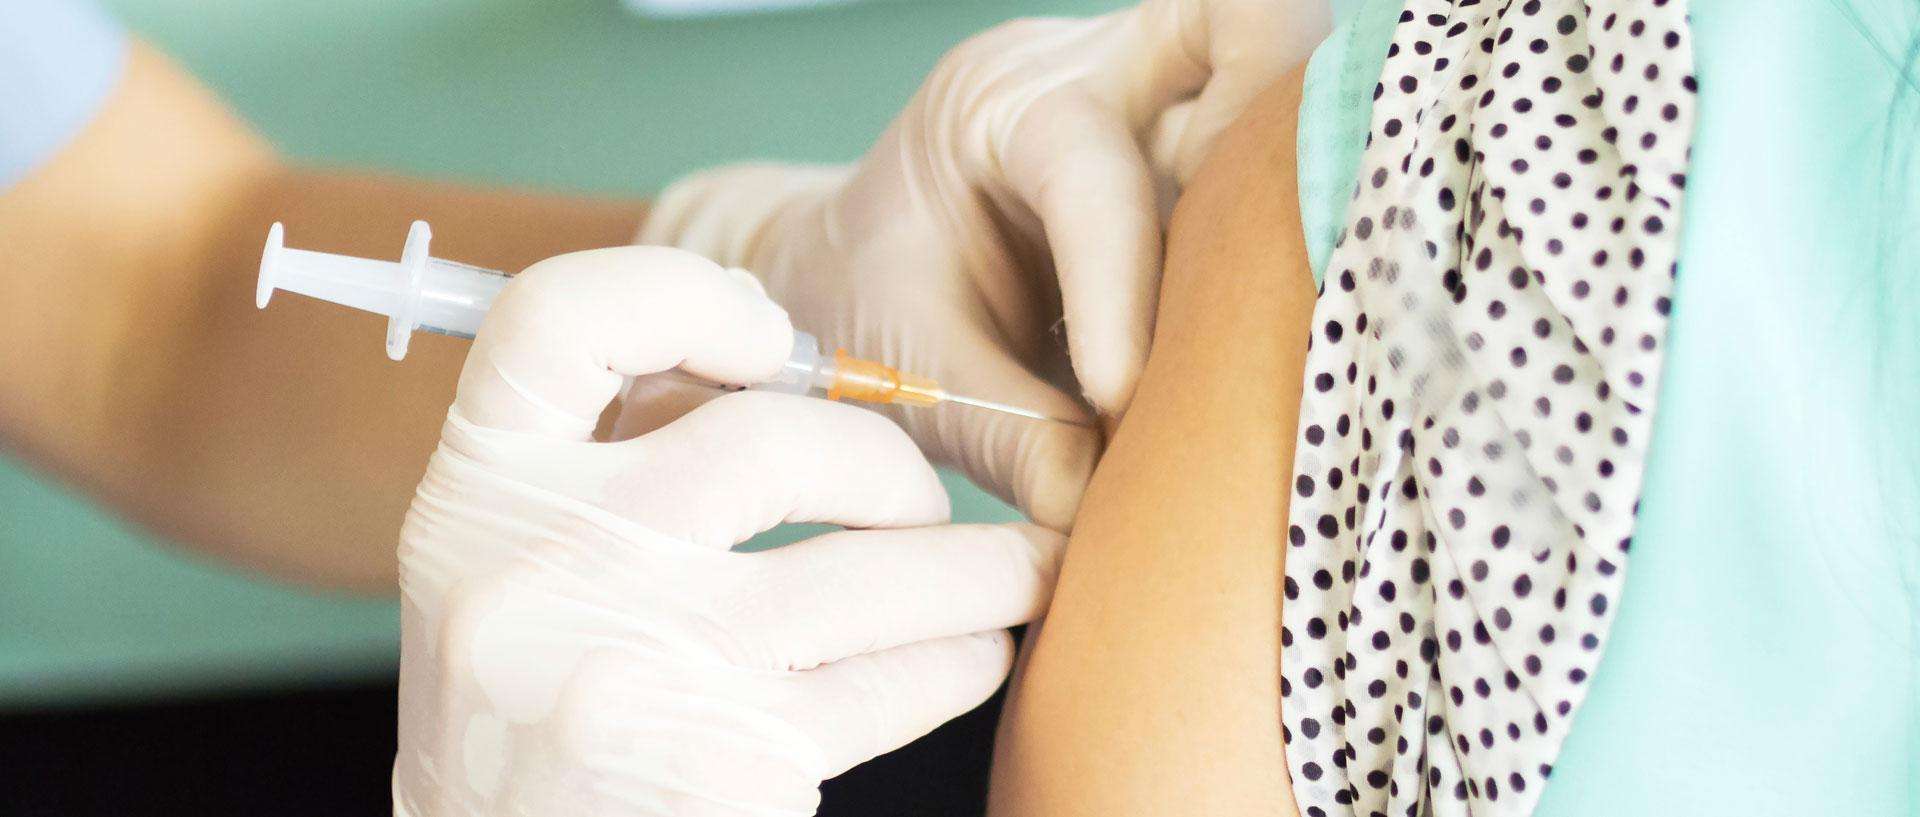 Why Does My Shingles Vaccine Cost So Much?